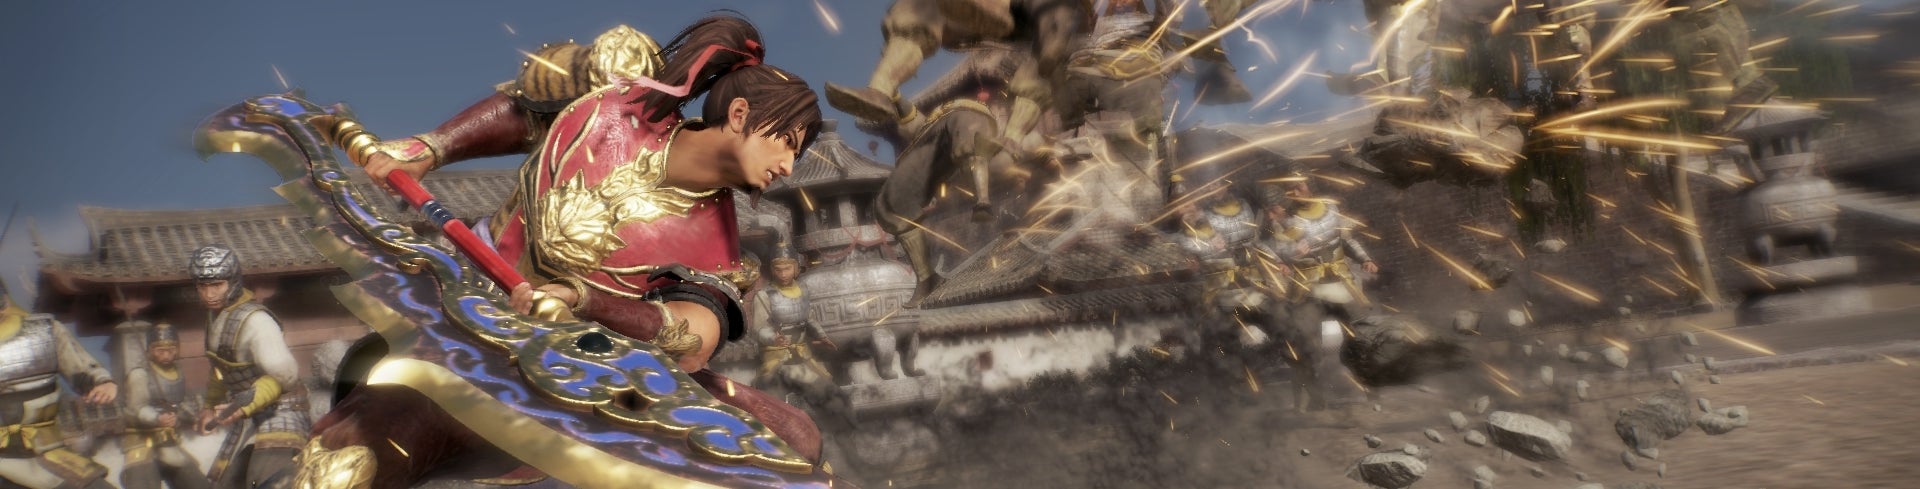 Image for Dynasty Warriors 9: the lowest performance we've seen on PS4 Pro and Xbox One X